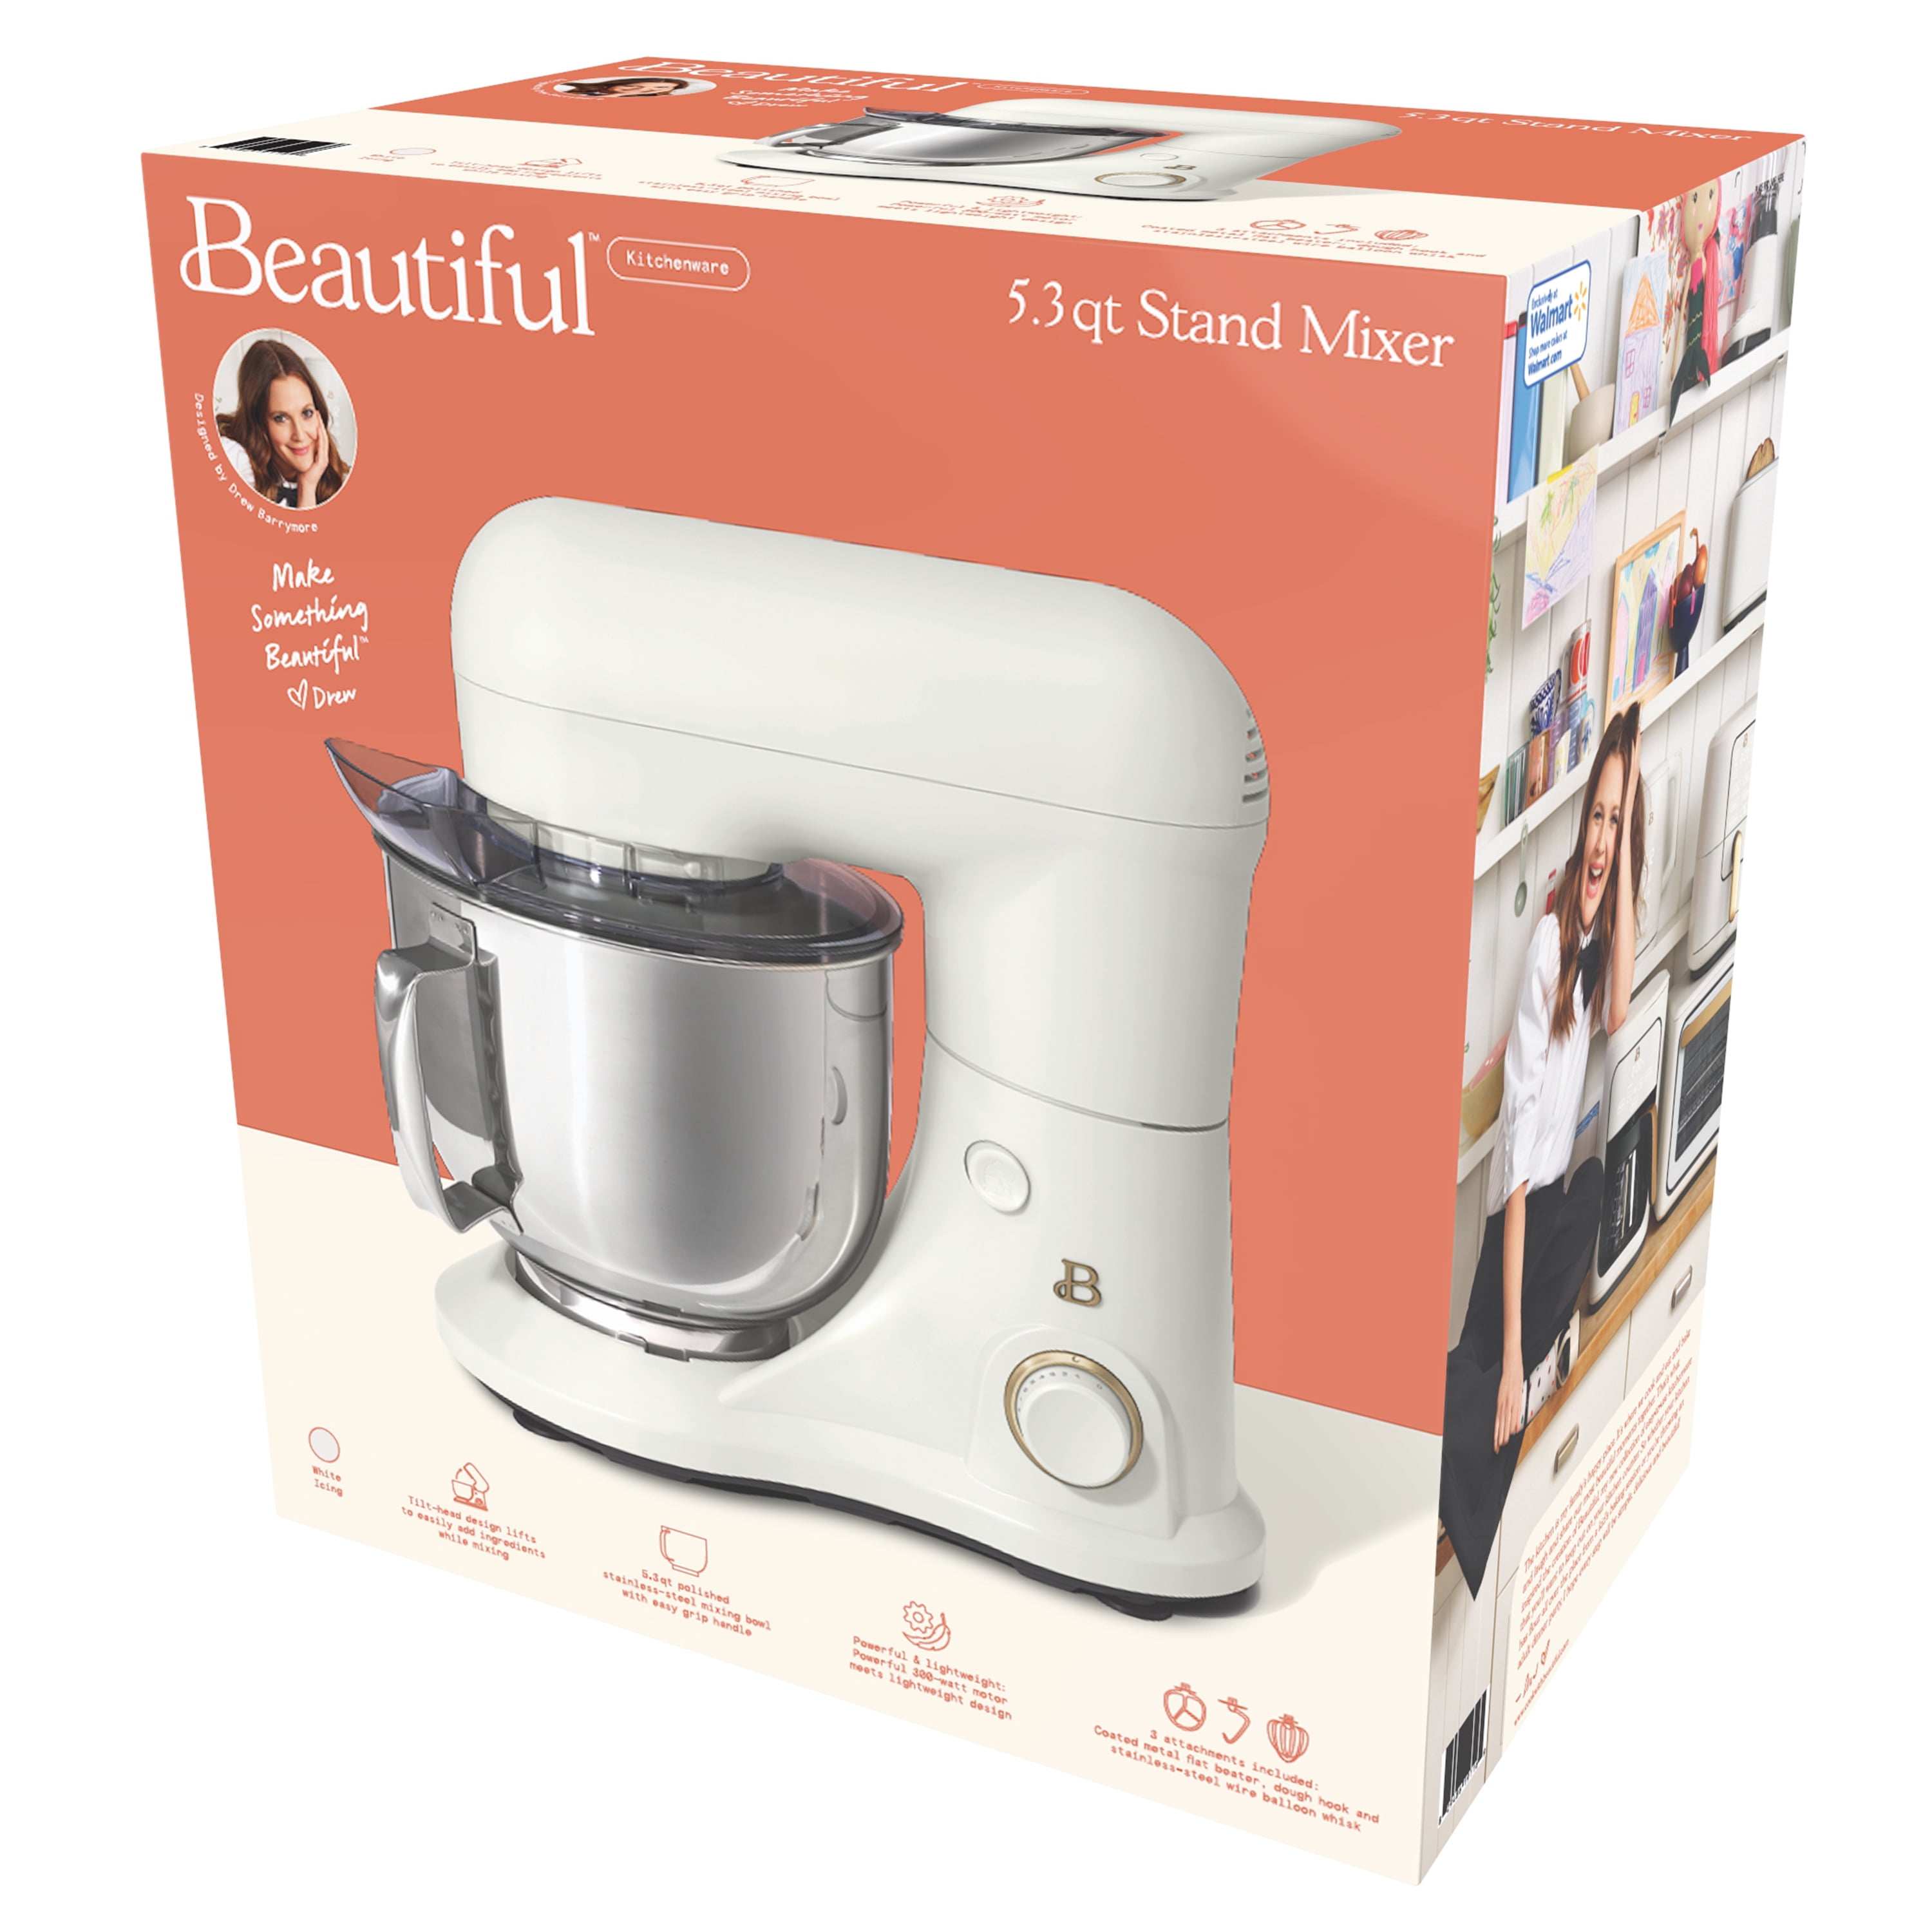 Beautiful 5.3 Qt Stand Mixer, Lightweight & Powerful with Tilt-Head, White  Icing by Drew Barrymore 